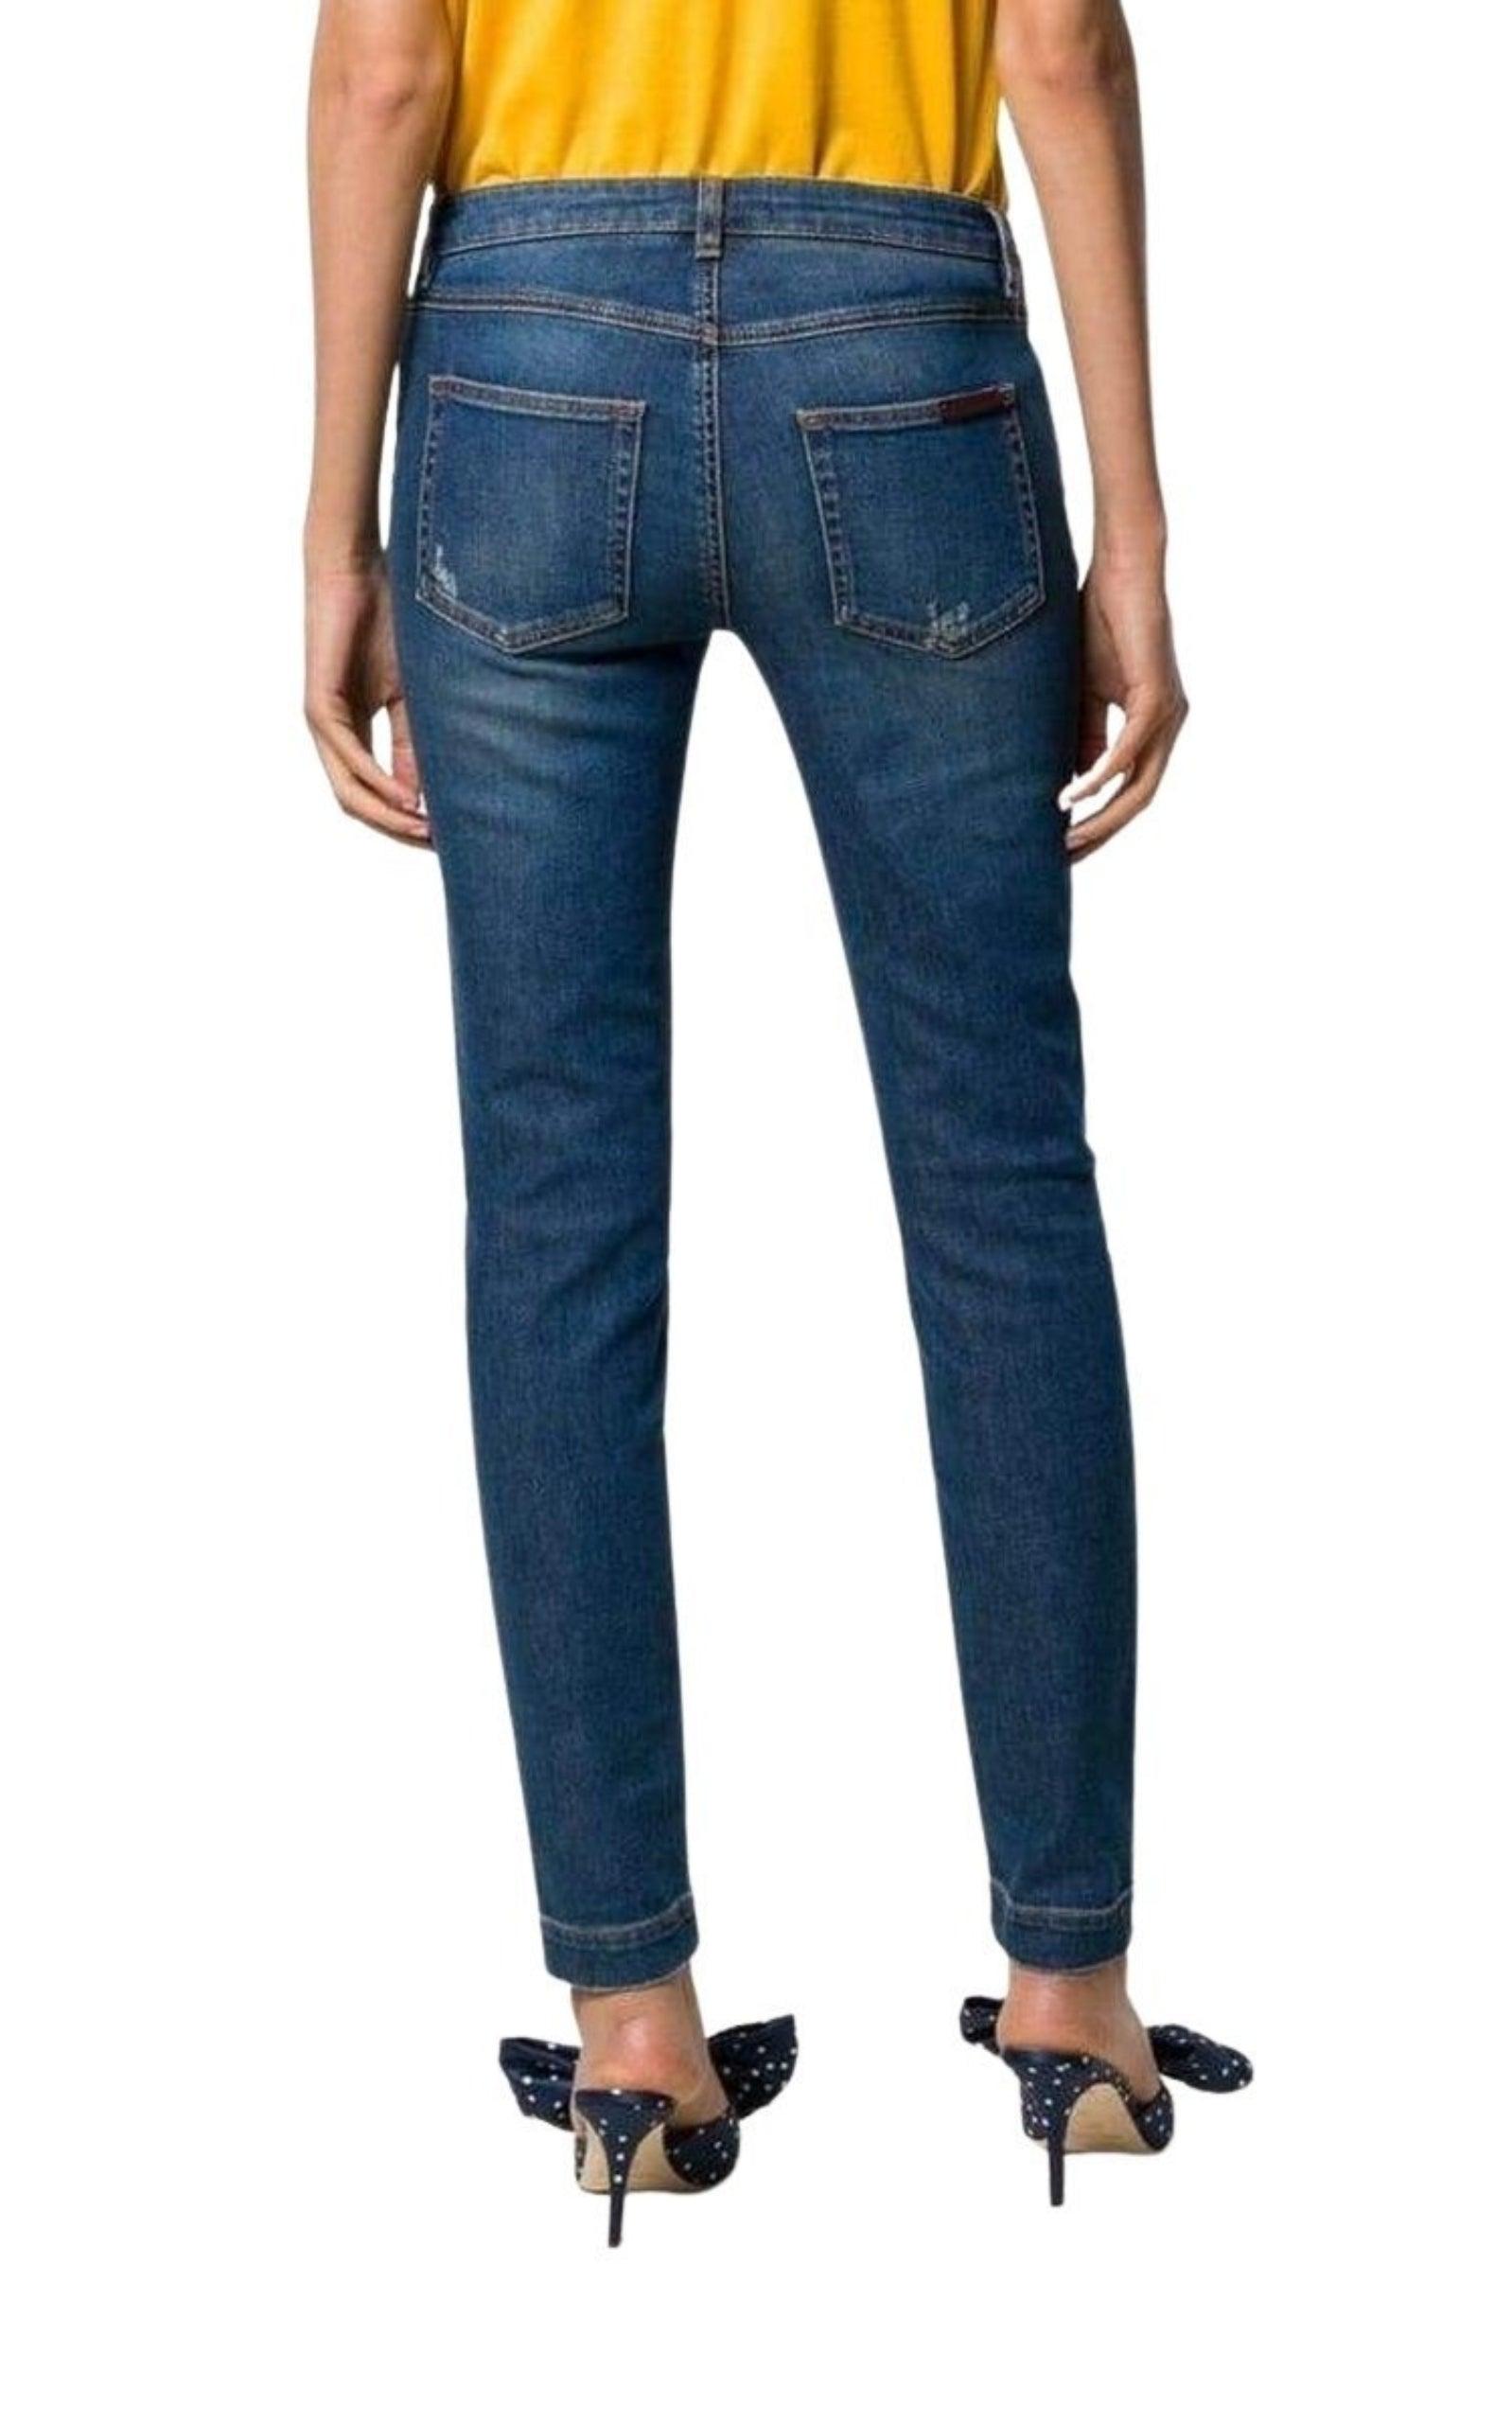  Dolce & GabbanaEmbroidery Skinny-fit Jeans - Runway Catalog